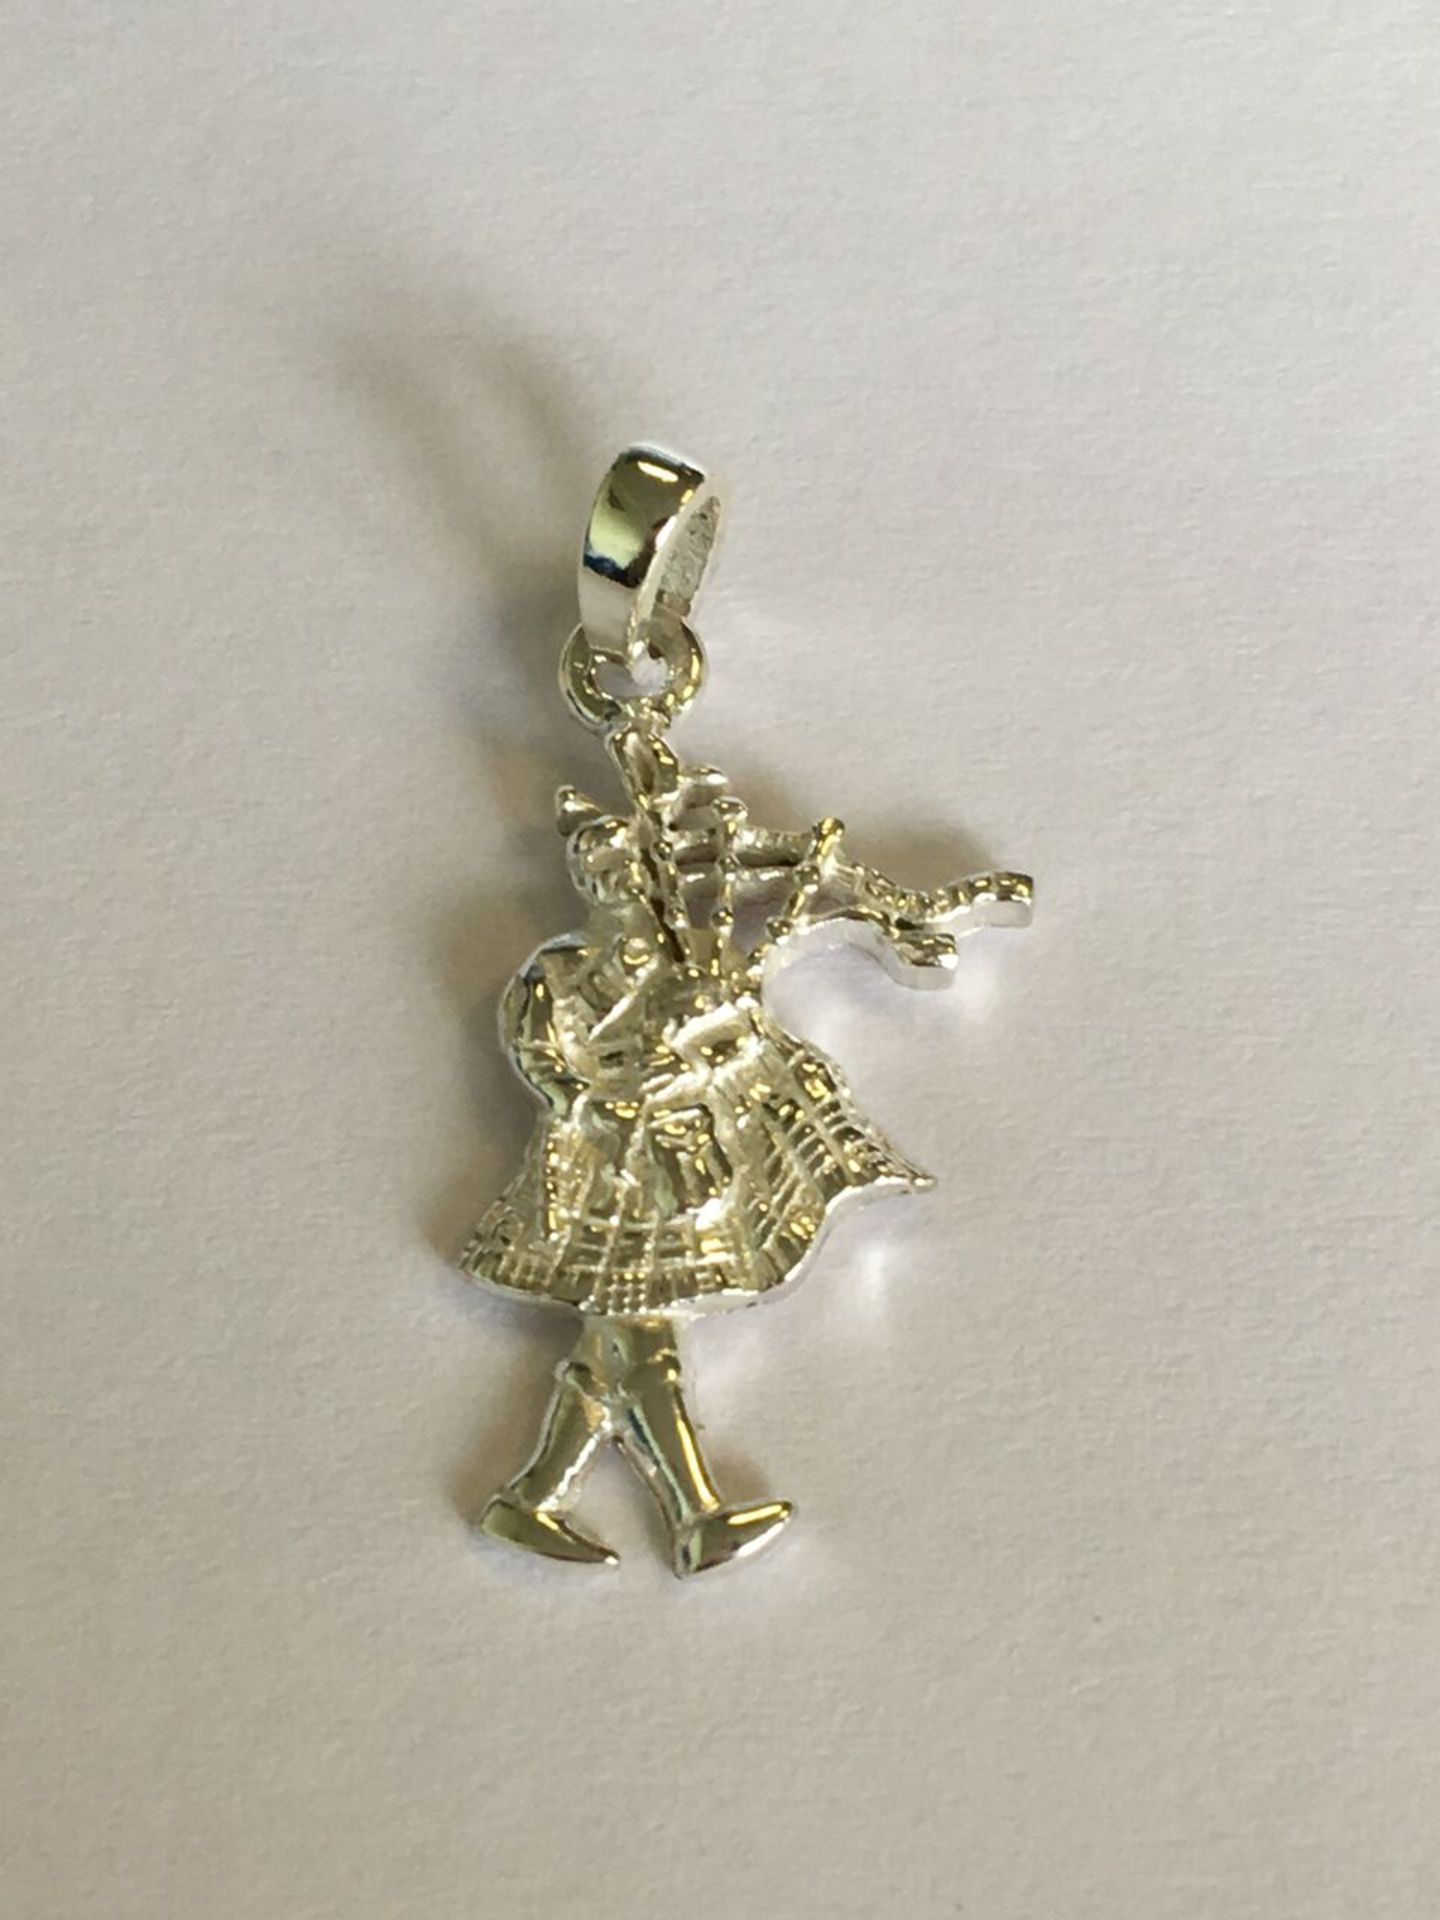 SILVER (STAMPED 925) CHARM OR PENDANT IN THE FORM OF A SCOTTISH PIPER. APPROX 2CM. FREE UK DELIVERY.